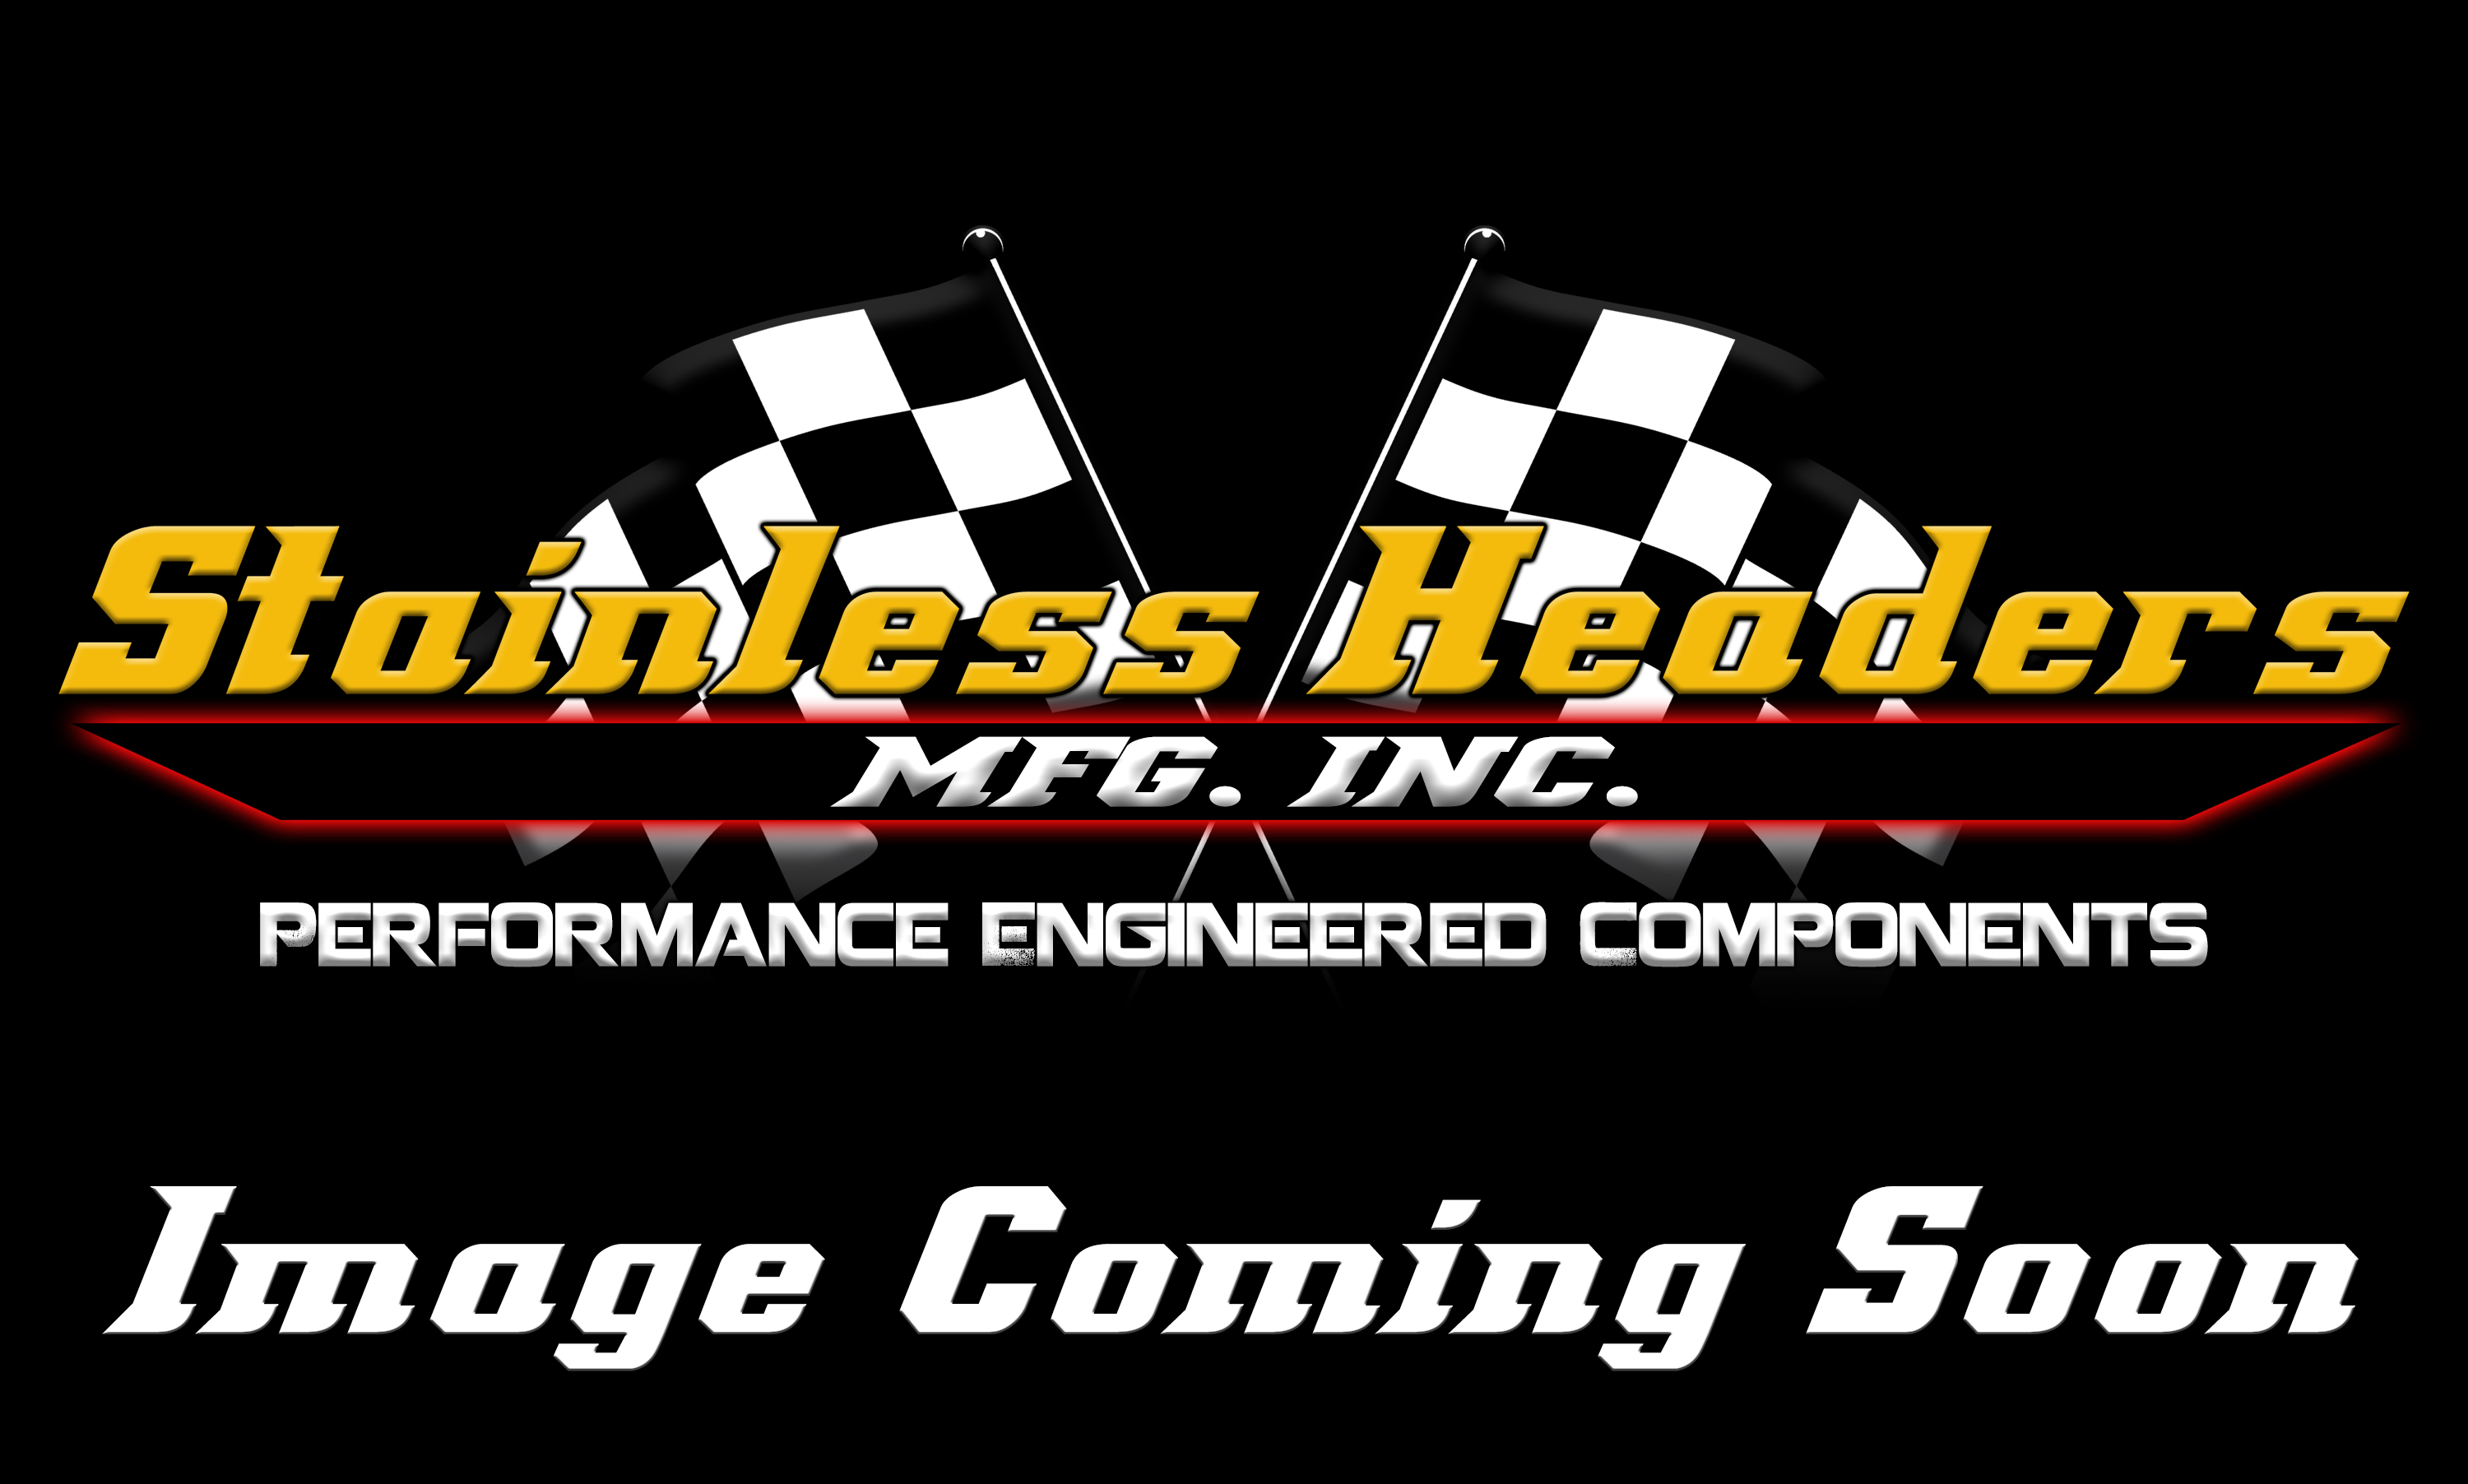 CompTurbo Technologies - CTR4508R-8085 Mid Frame Oil Lubricated 2.0 Turbocharger (1350 HP)